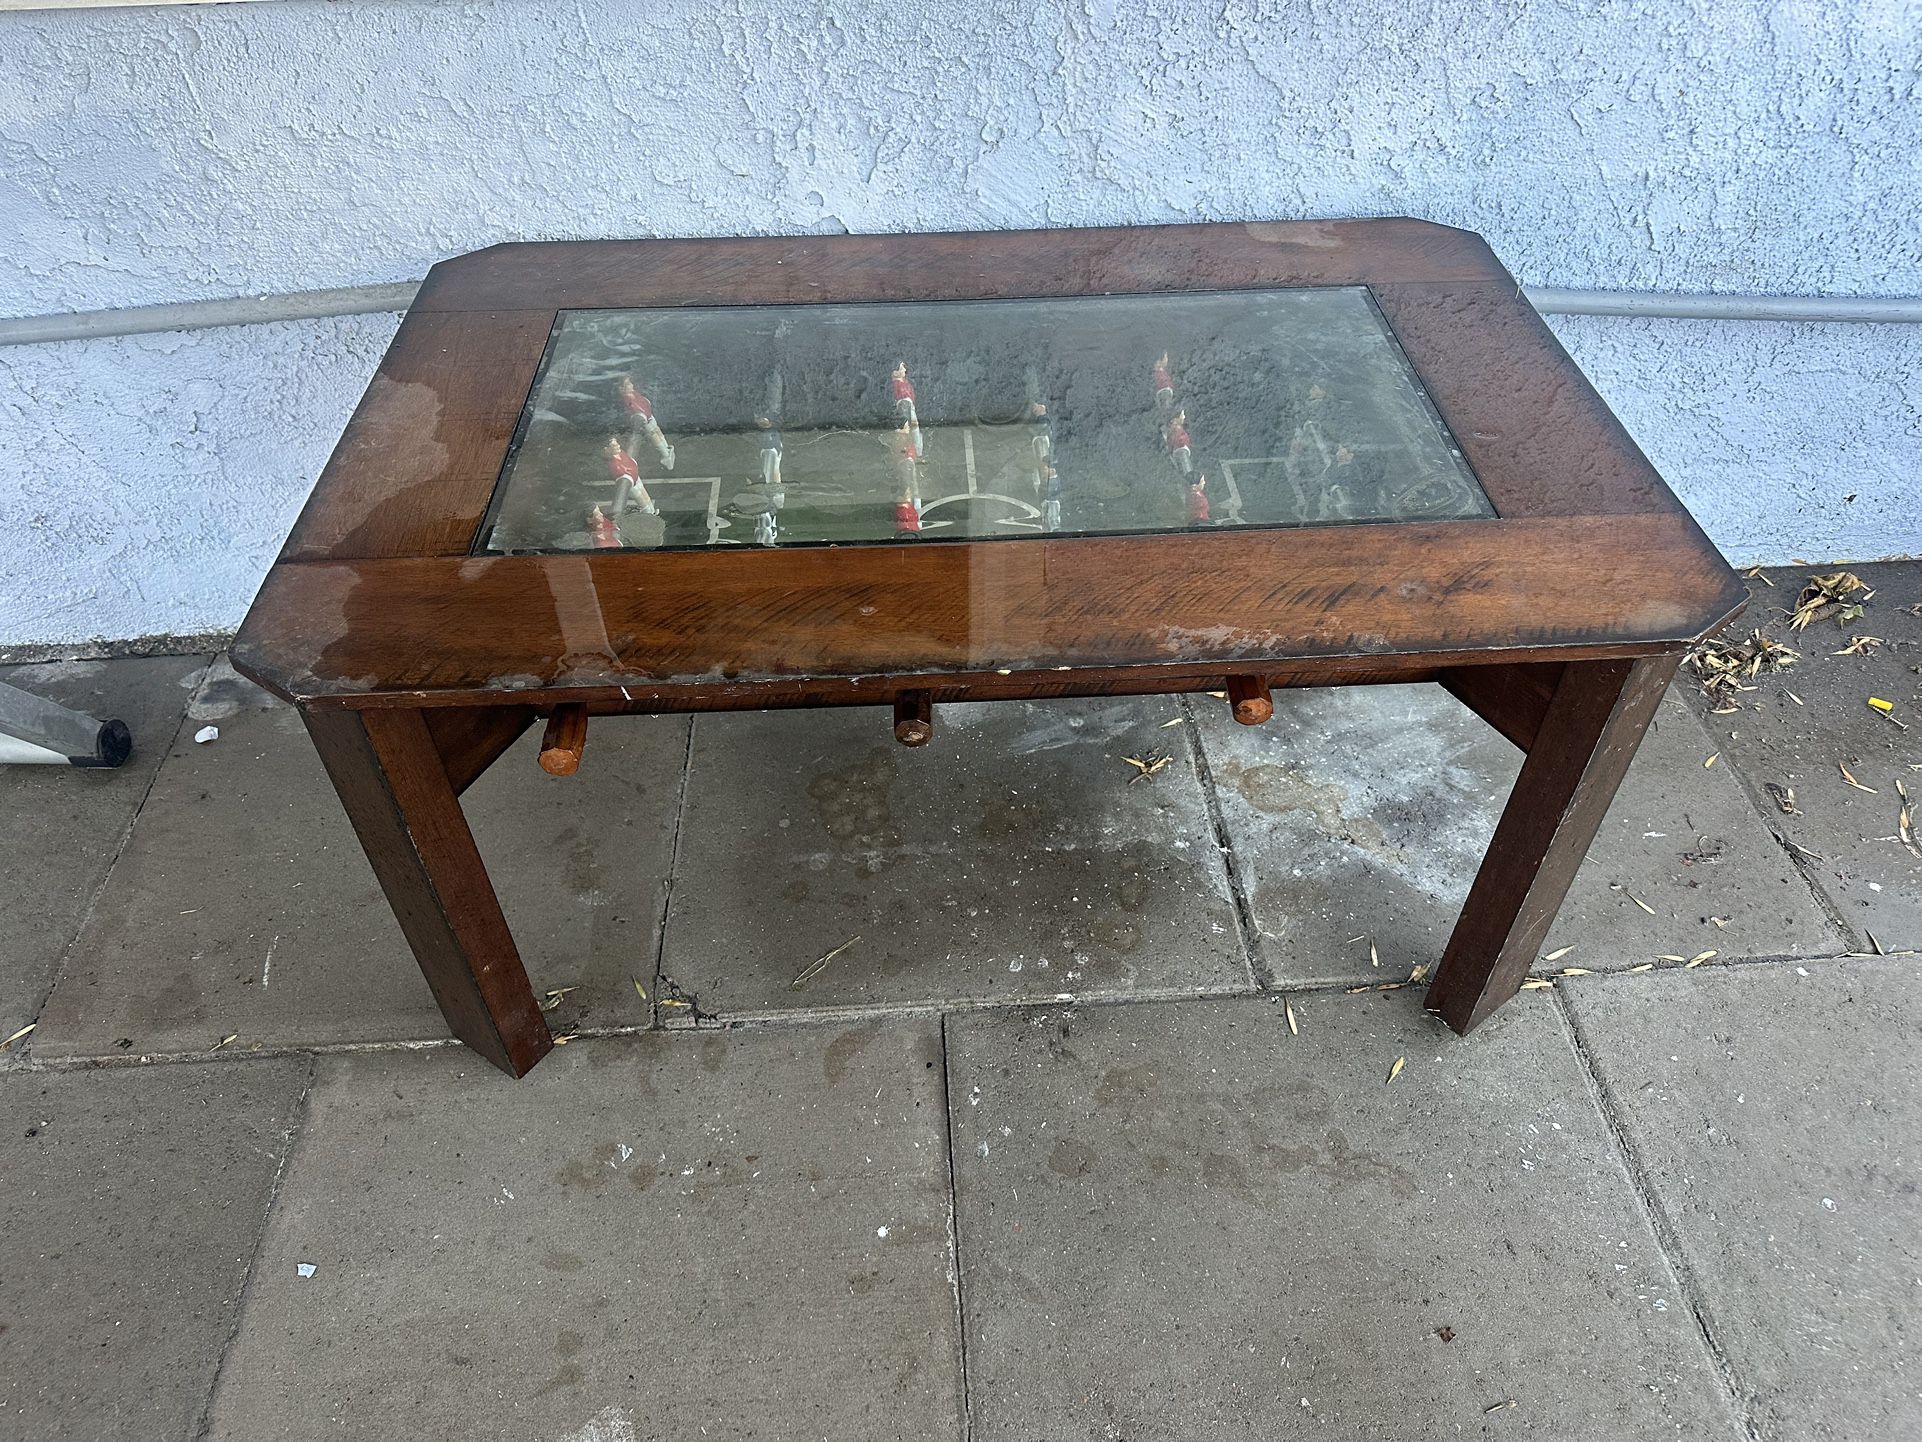 Kids Soccer Playing Table 